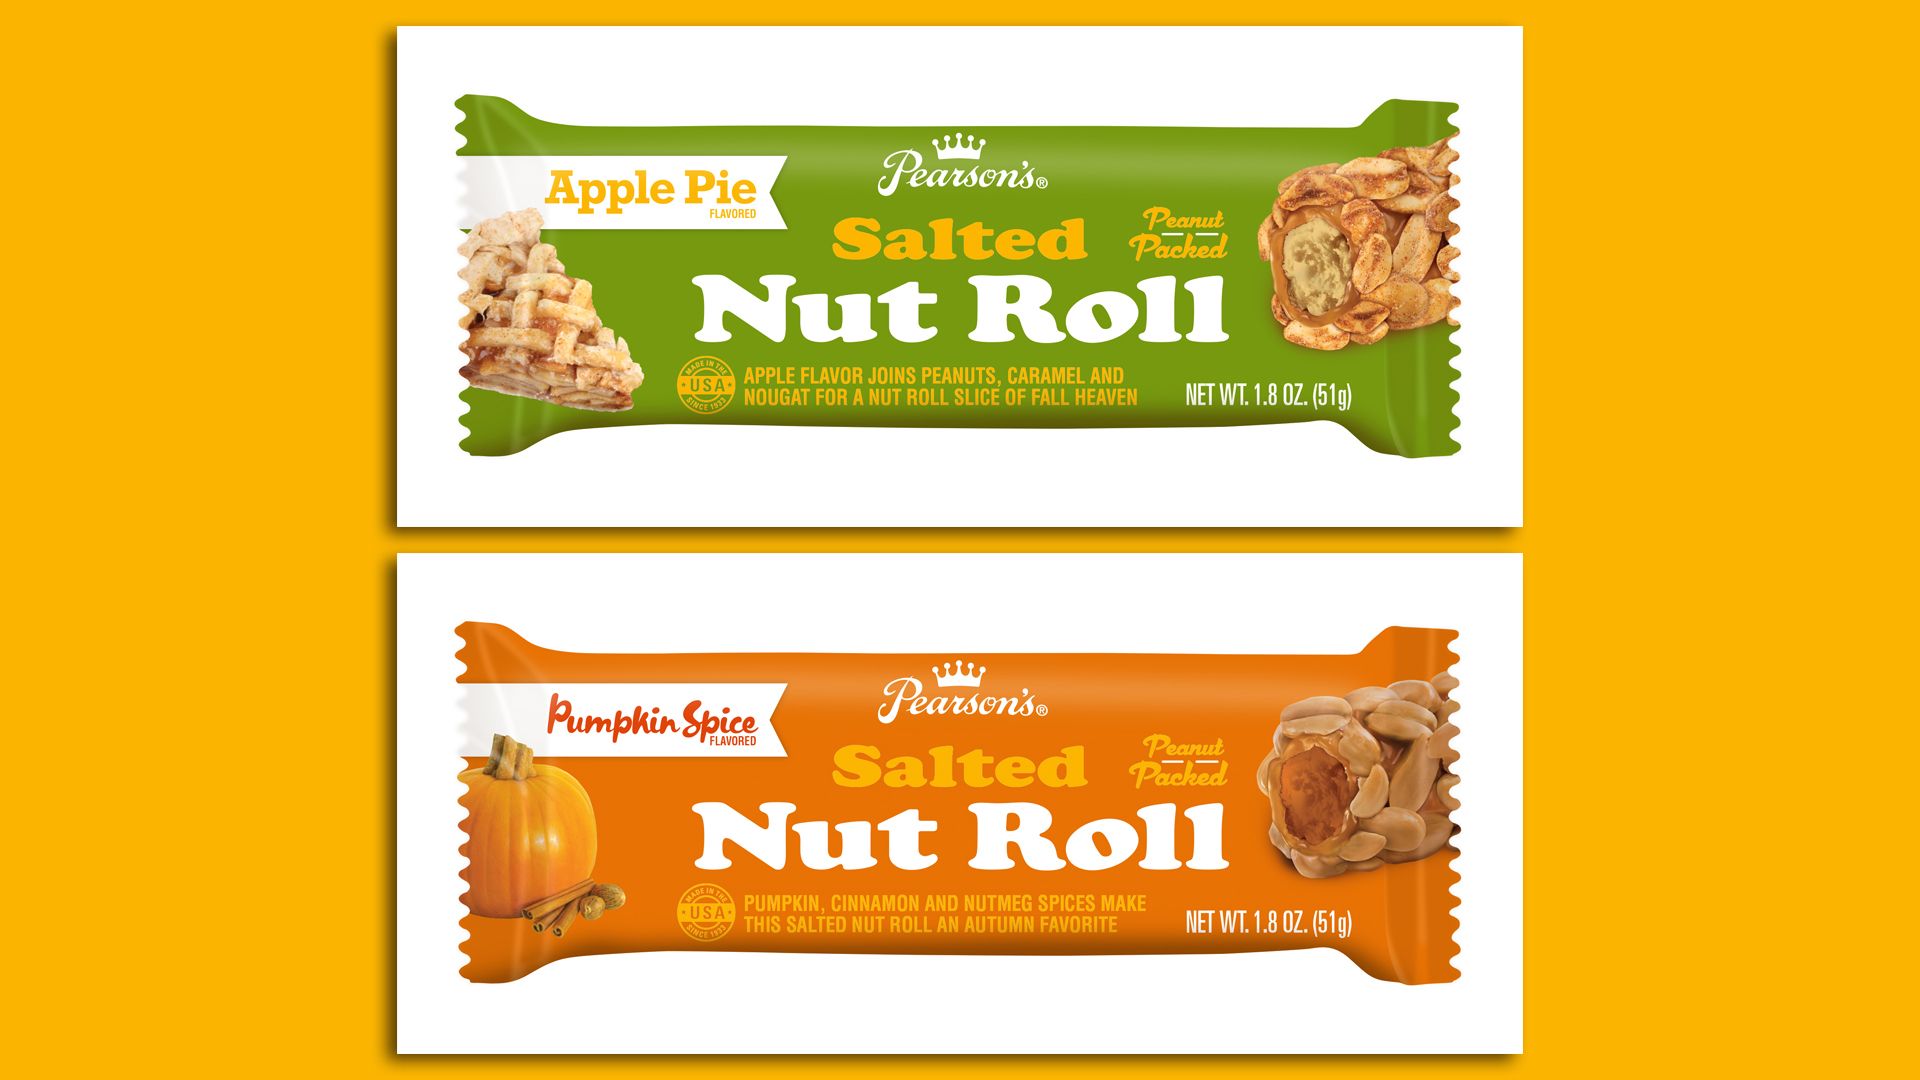 A green nut roll wrapped with apple flavor above an orange one with pumpkin flavor 